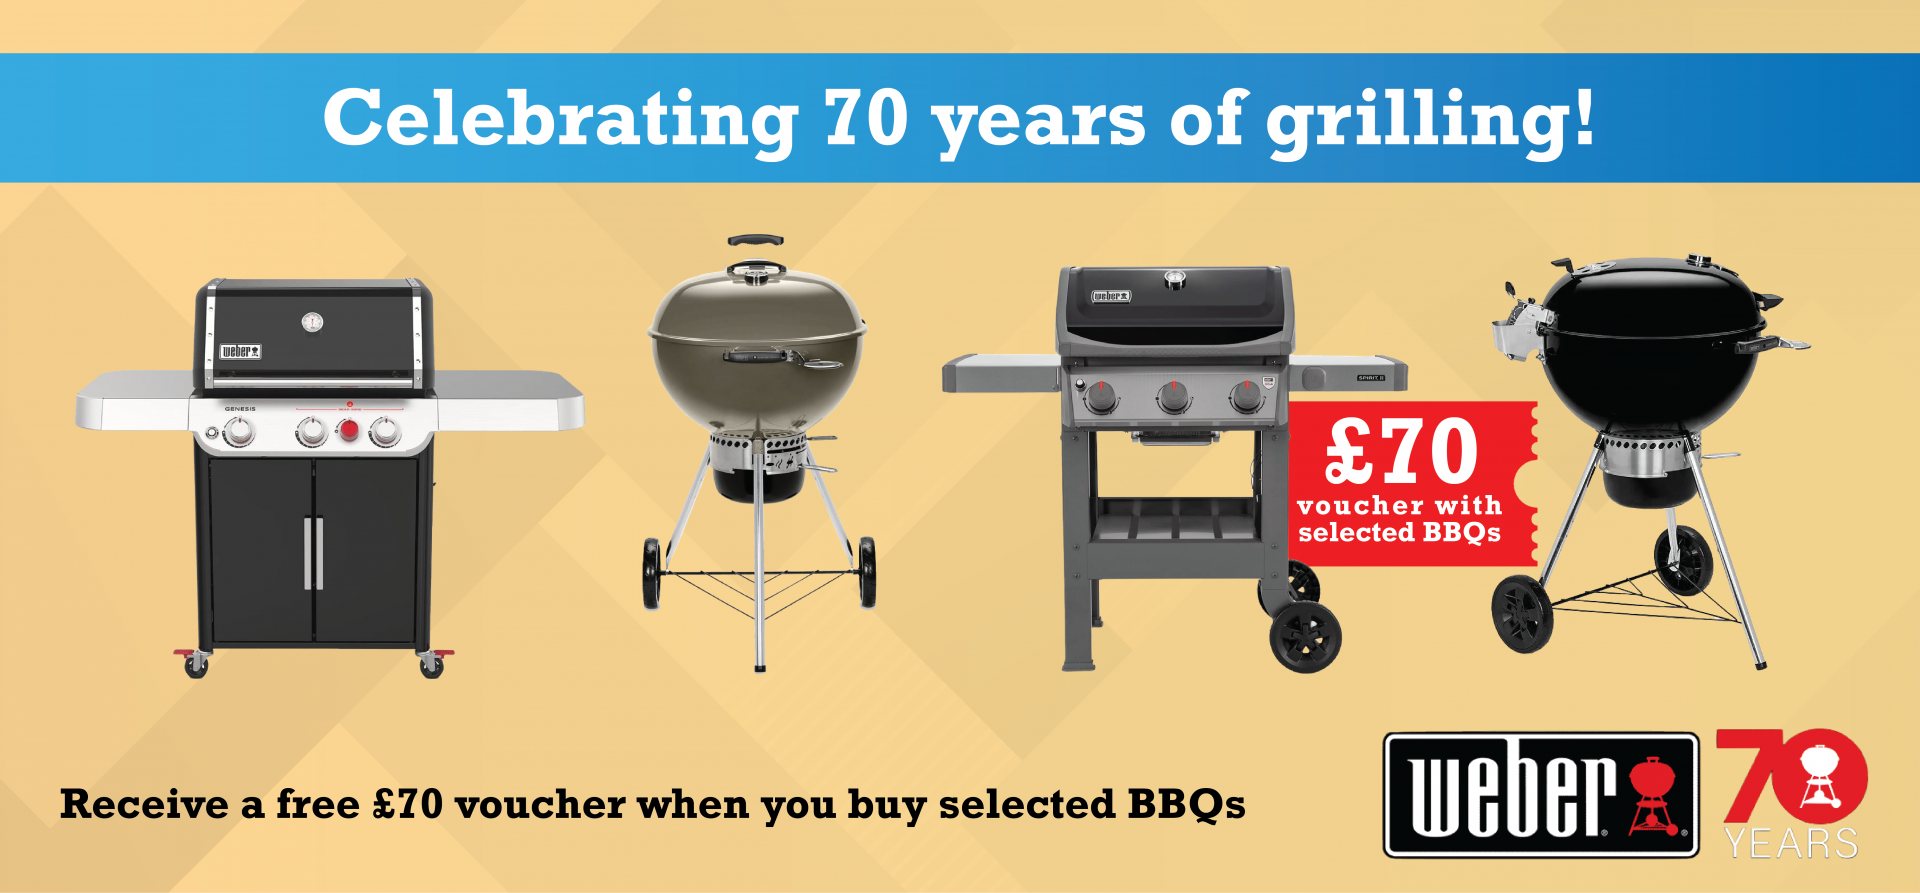 CELEBRATING 70 YEARS OF GRILLING